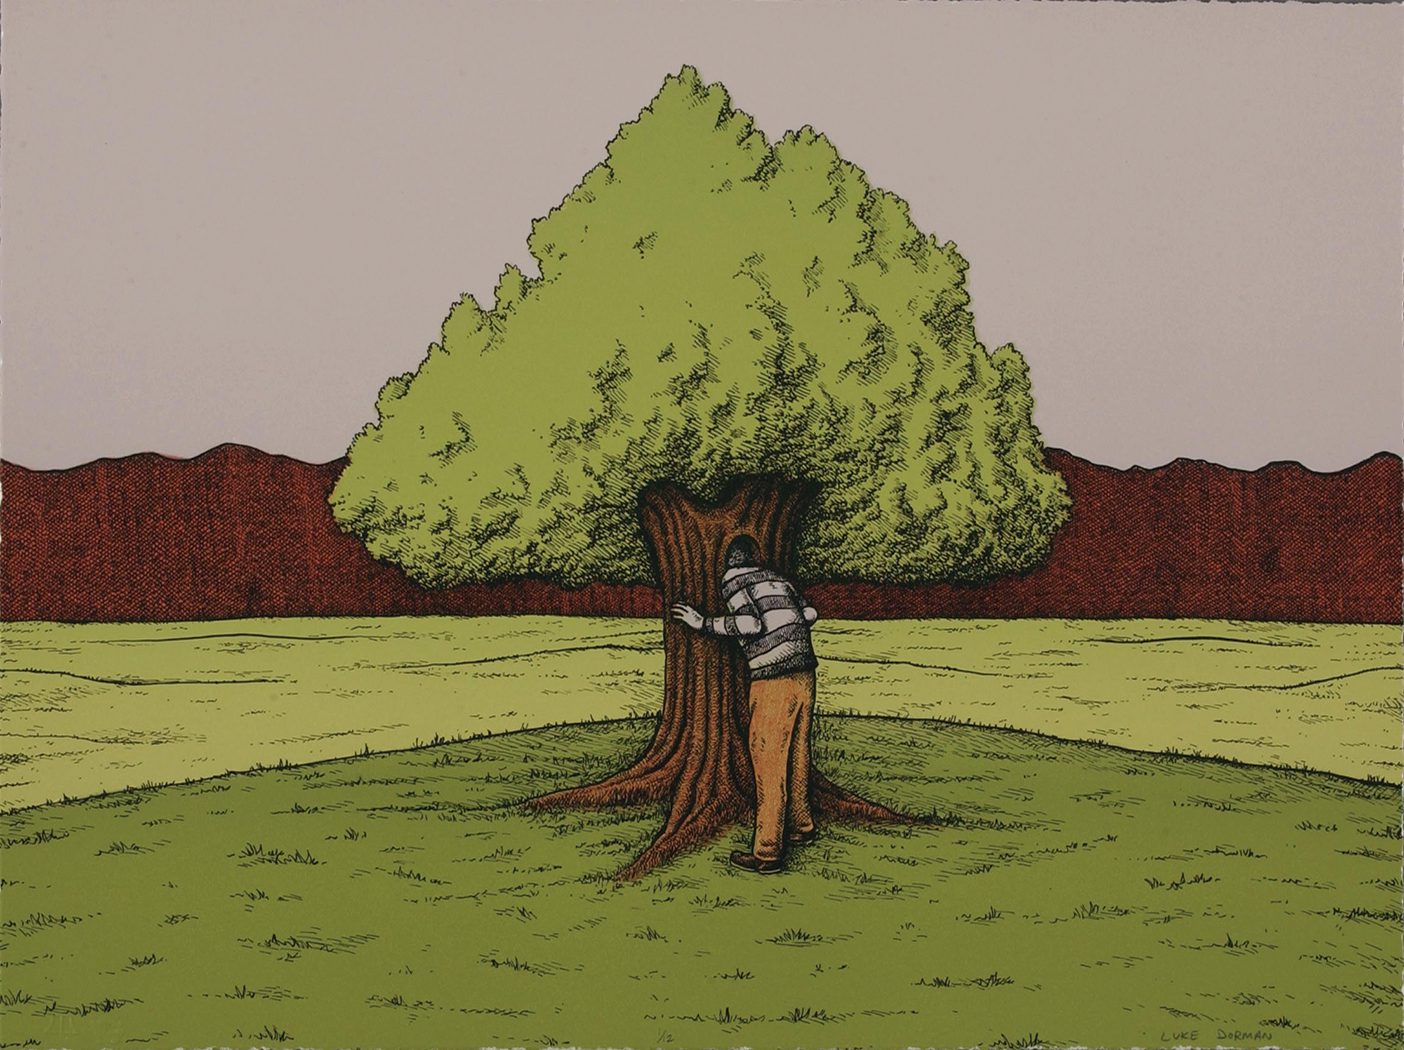 A colored print of a man hugging a tree in a green field.